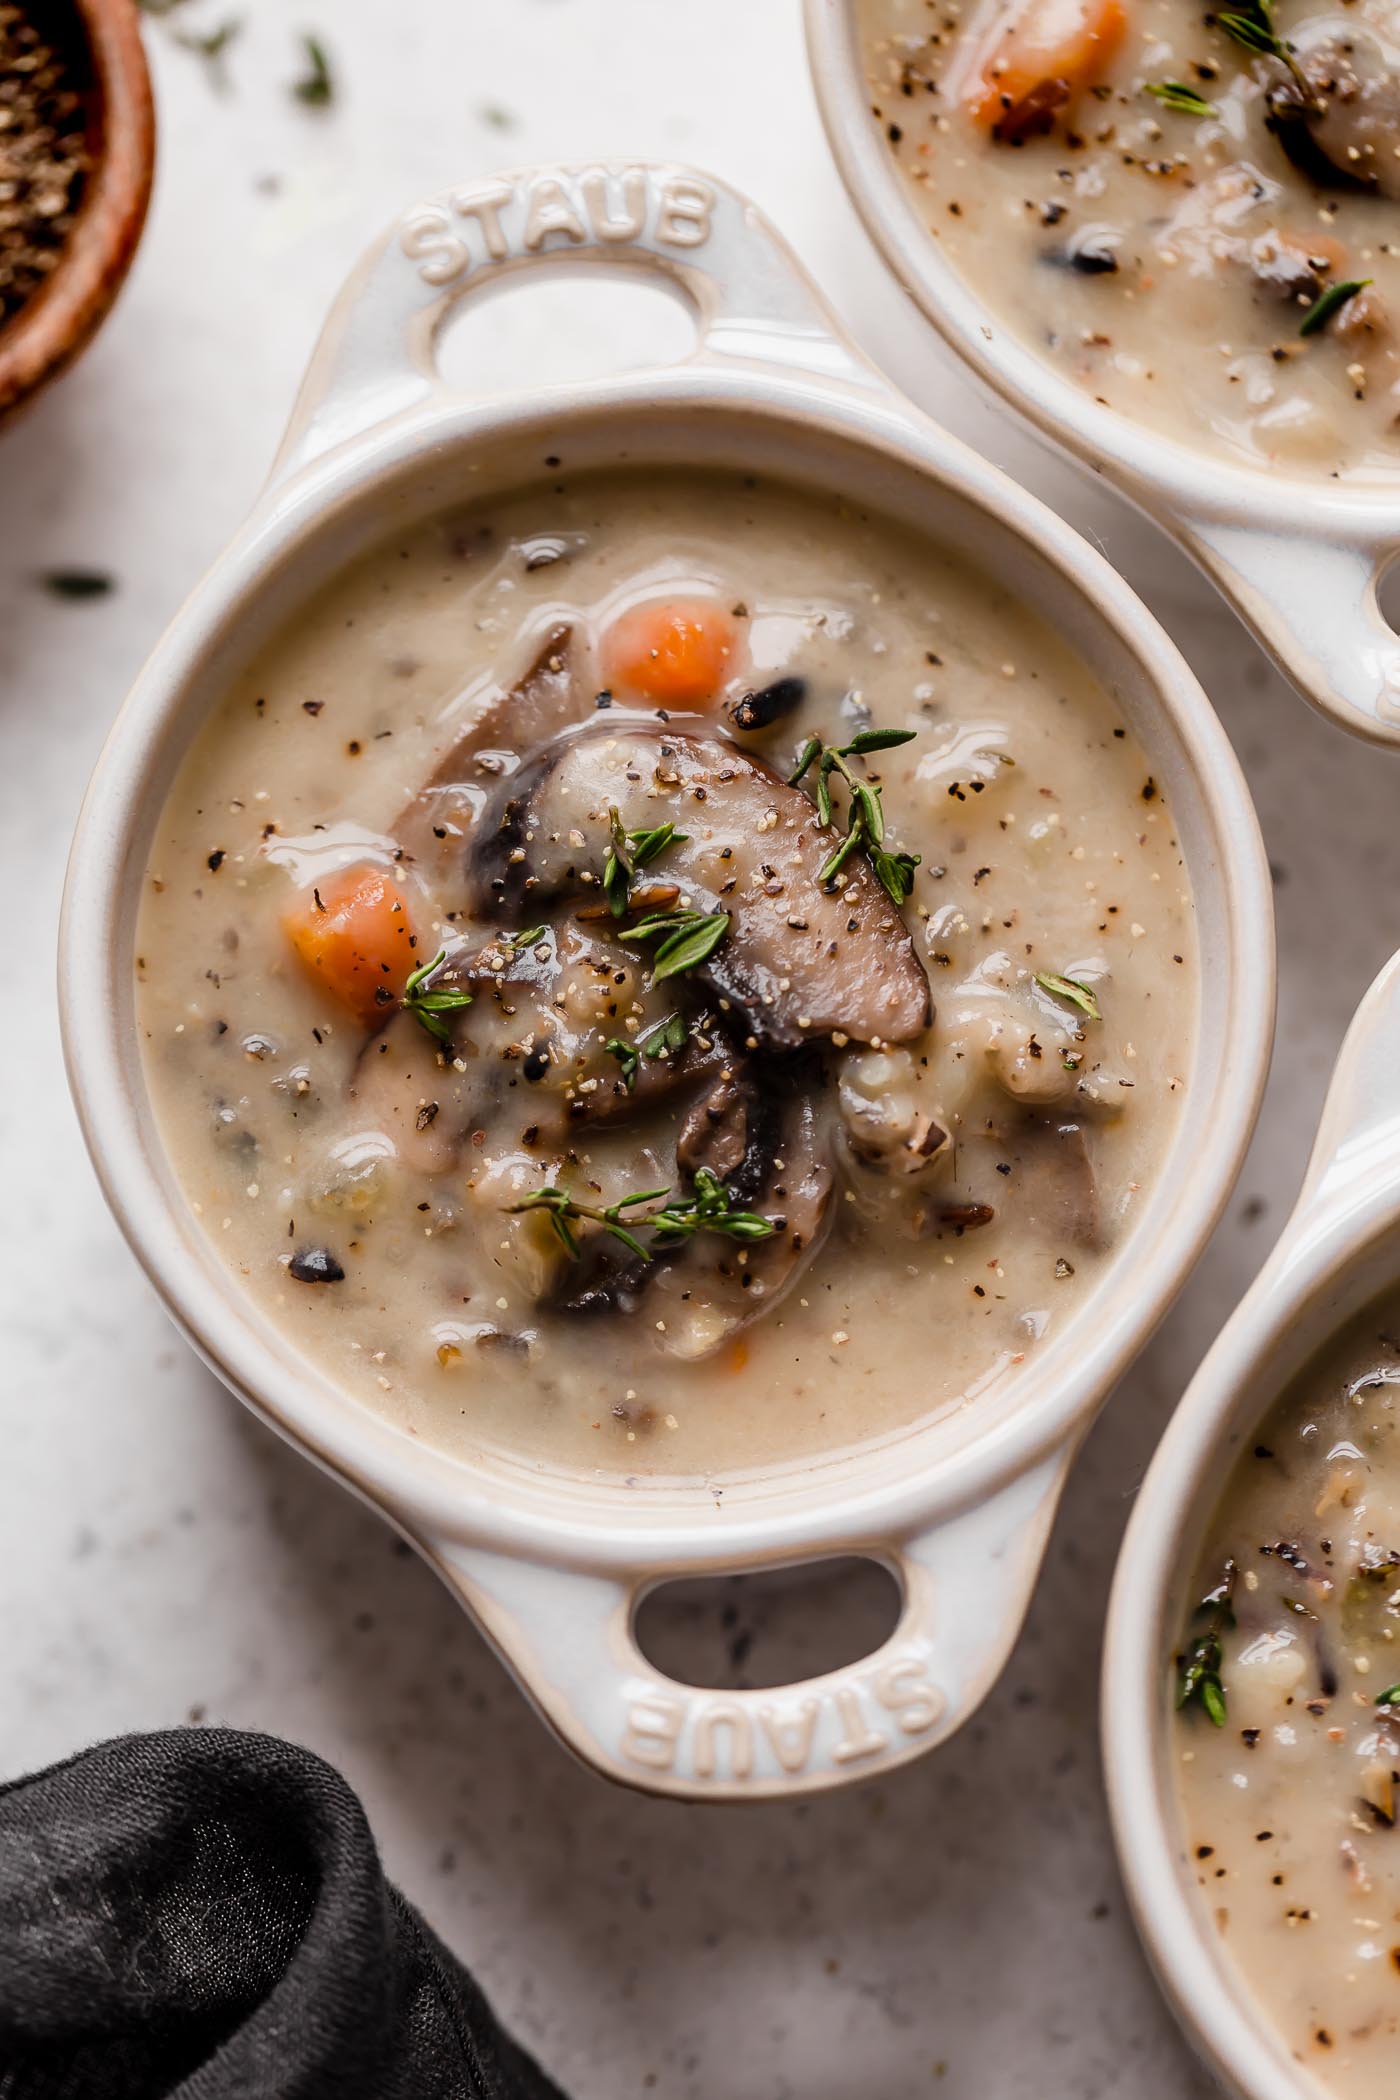 a satisfying vegetarian wild rice soup filled with mushrooms, wild rice, & kale. this creamy wild rice soup is thickened without using any dairy or a flour roux thanks to a totally healthy secret ingredient...cauliflower! {plant-based, vegetarian, vegan, dairy-free, gluten-free} #wildricesoup #vegetarianwildricesoup #mushroomwildricesoup #wildricesouprecipe #dairyfreewildricesoup #souprecipes #healthysoup #veganrecipes #vegansoup #glutenfreerecipes #glutenfreesoup